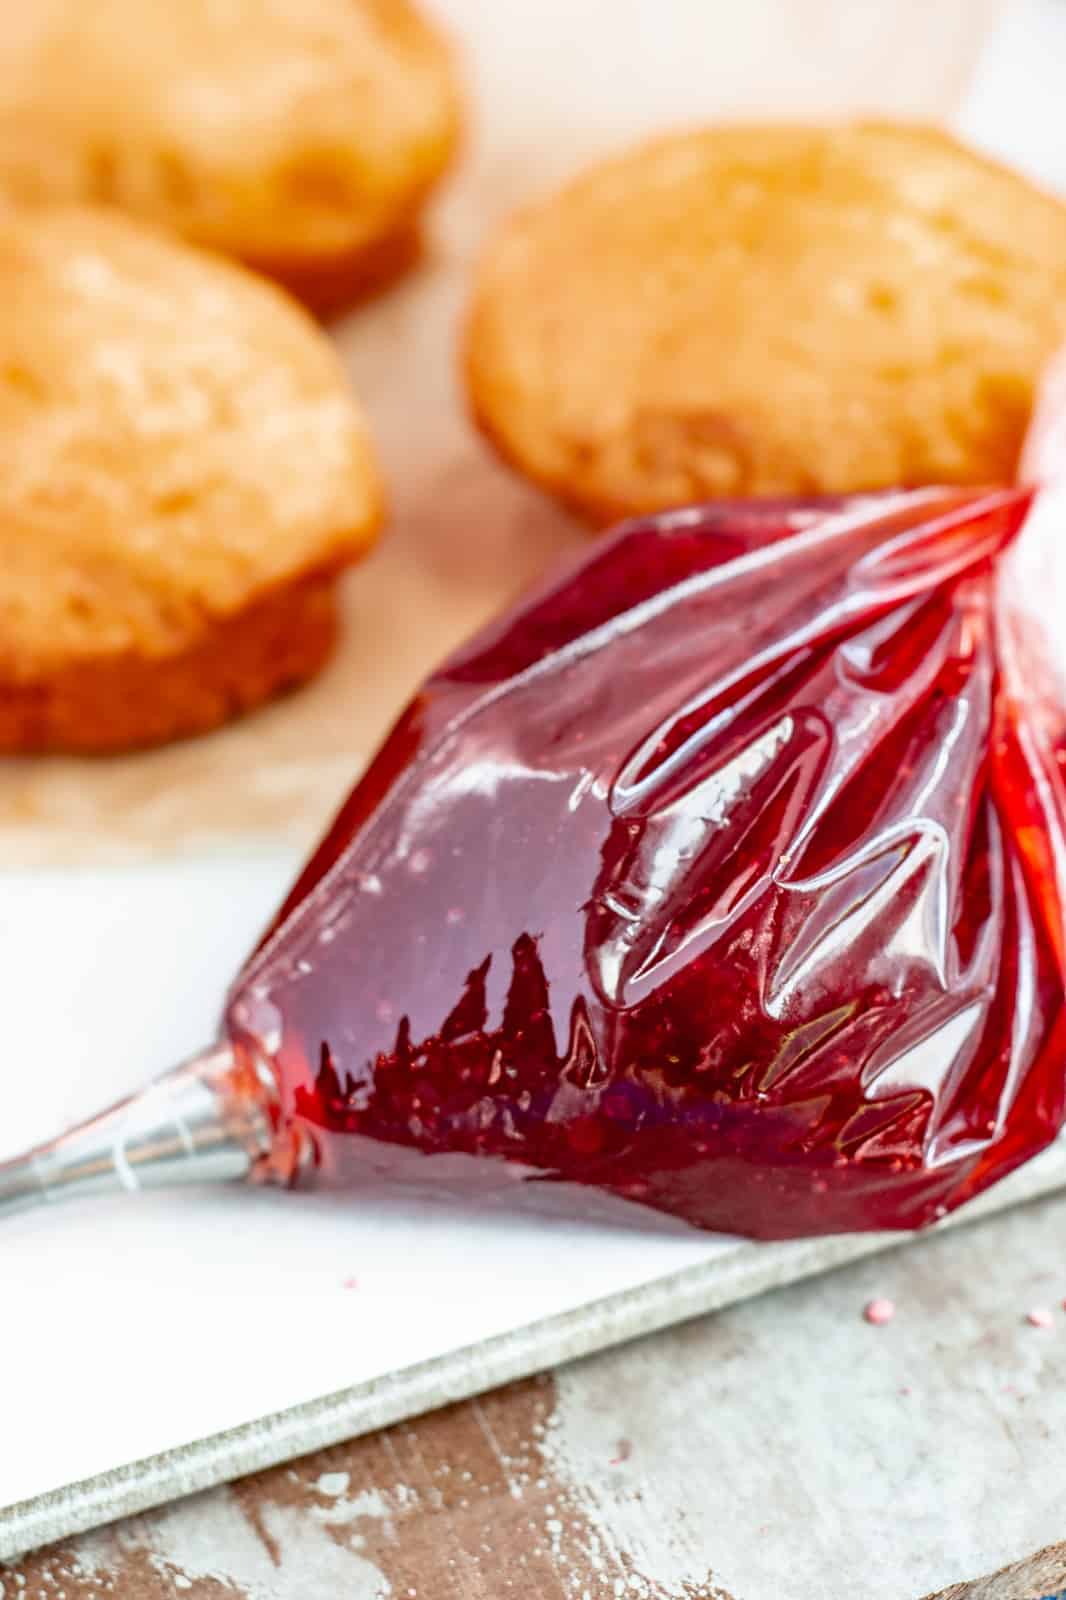 Piping bag filled with jelly.